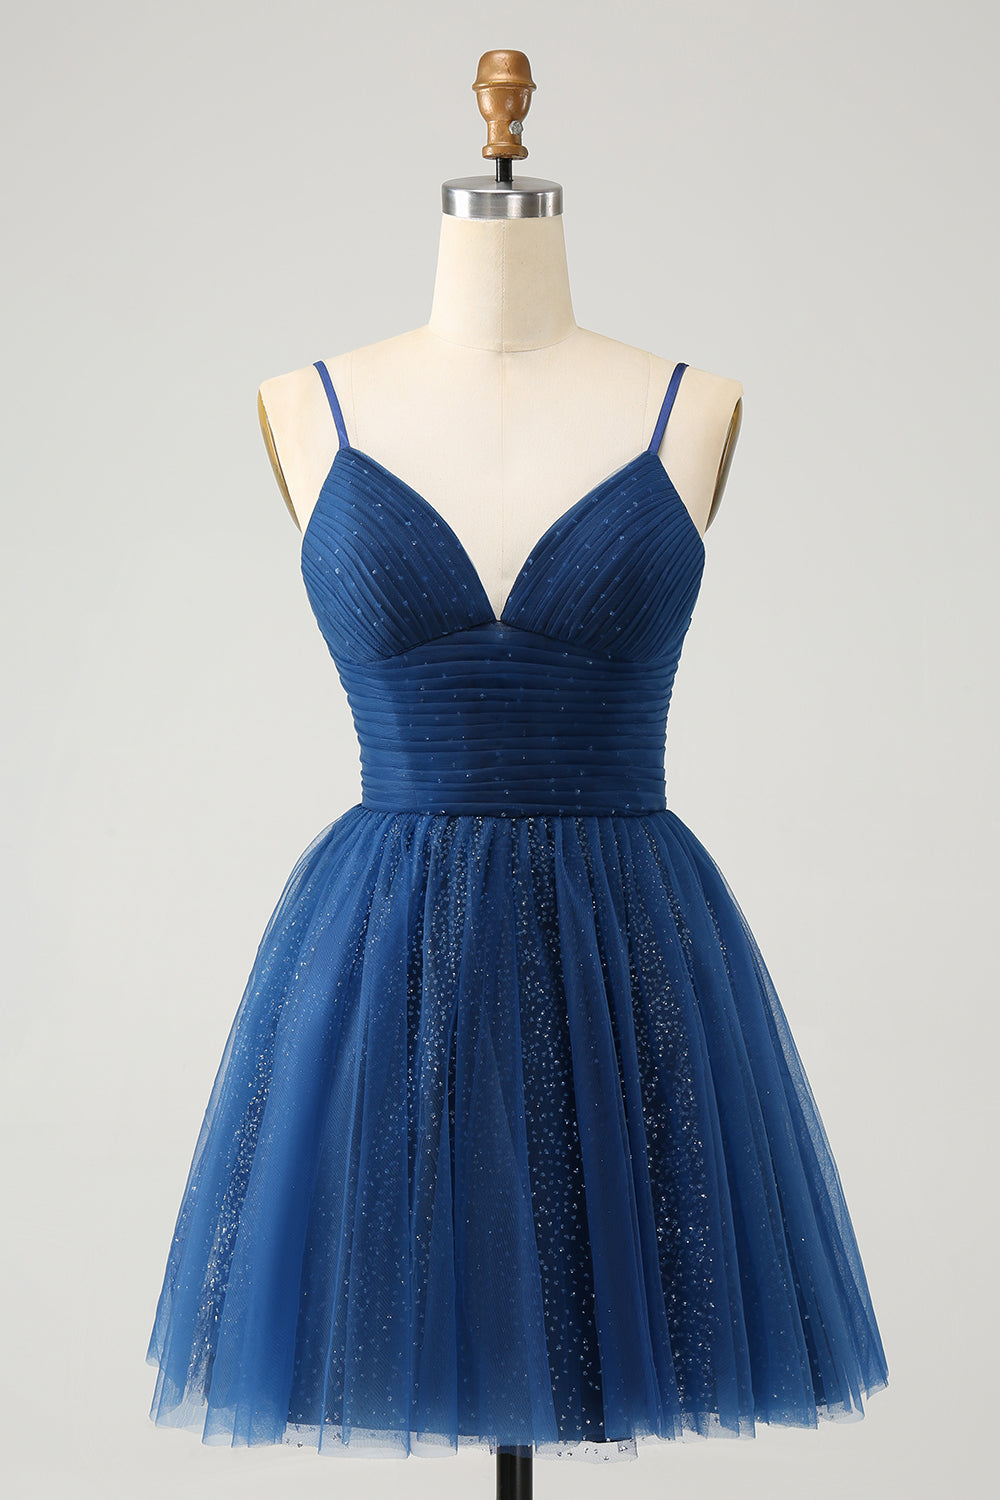 Navy A Line Spaghetti Straps Tulle Lace Up Back Homecoming Dress